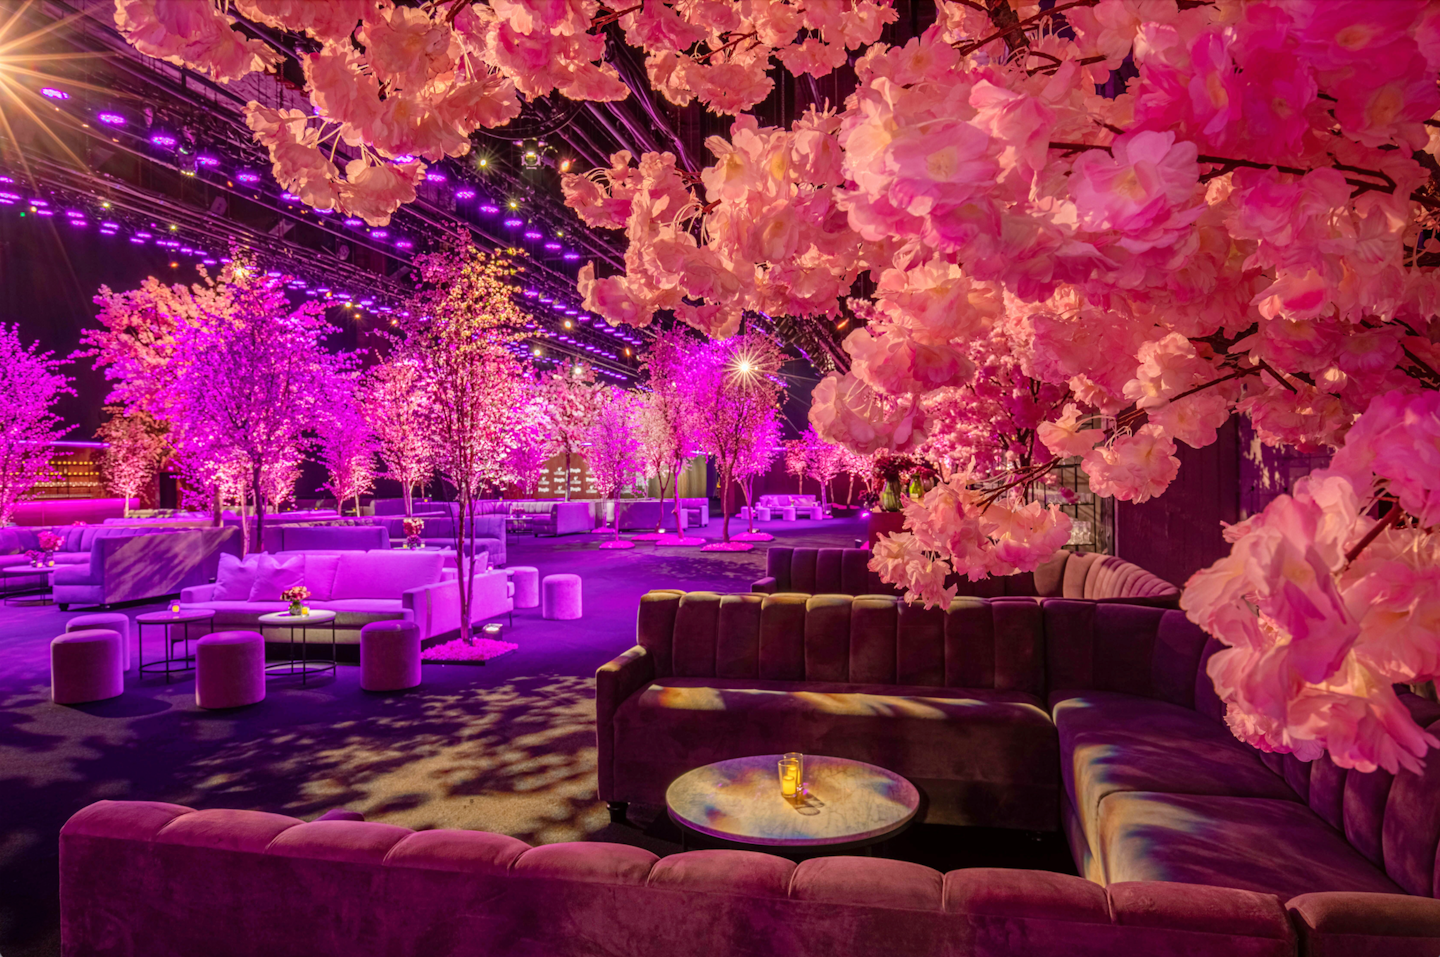 The 2020 SAG Awards after-party had a 'cherry blossom forest' theme. See more: See the SAG Awards' Cherry Blossom-Filled After-Party